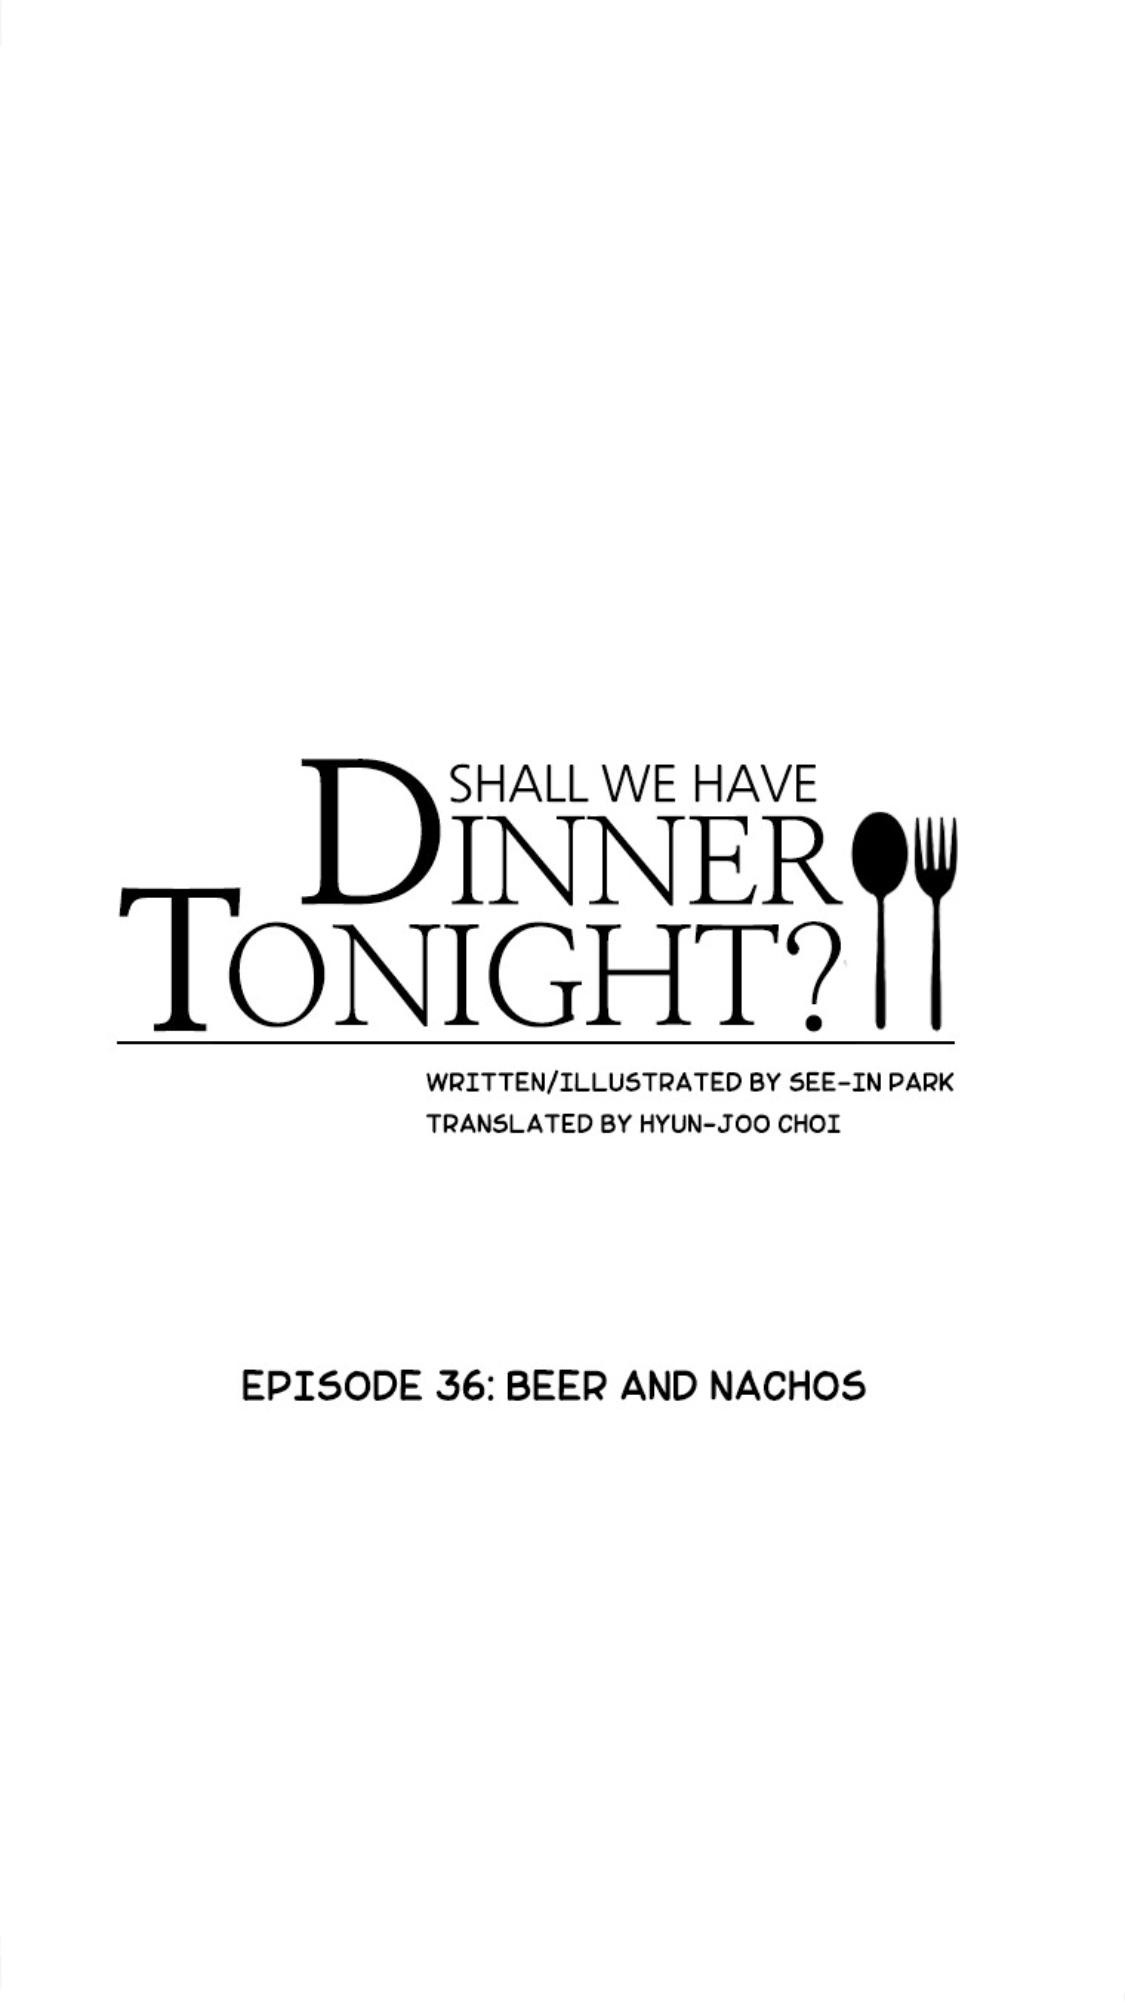 How about having Dinner together? - episode 37 - 3